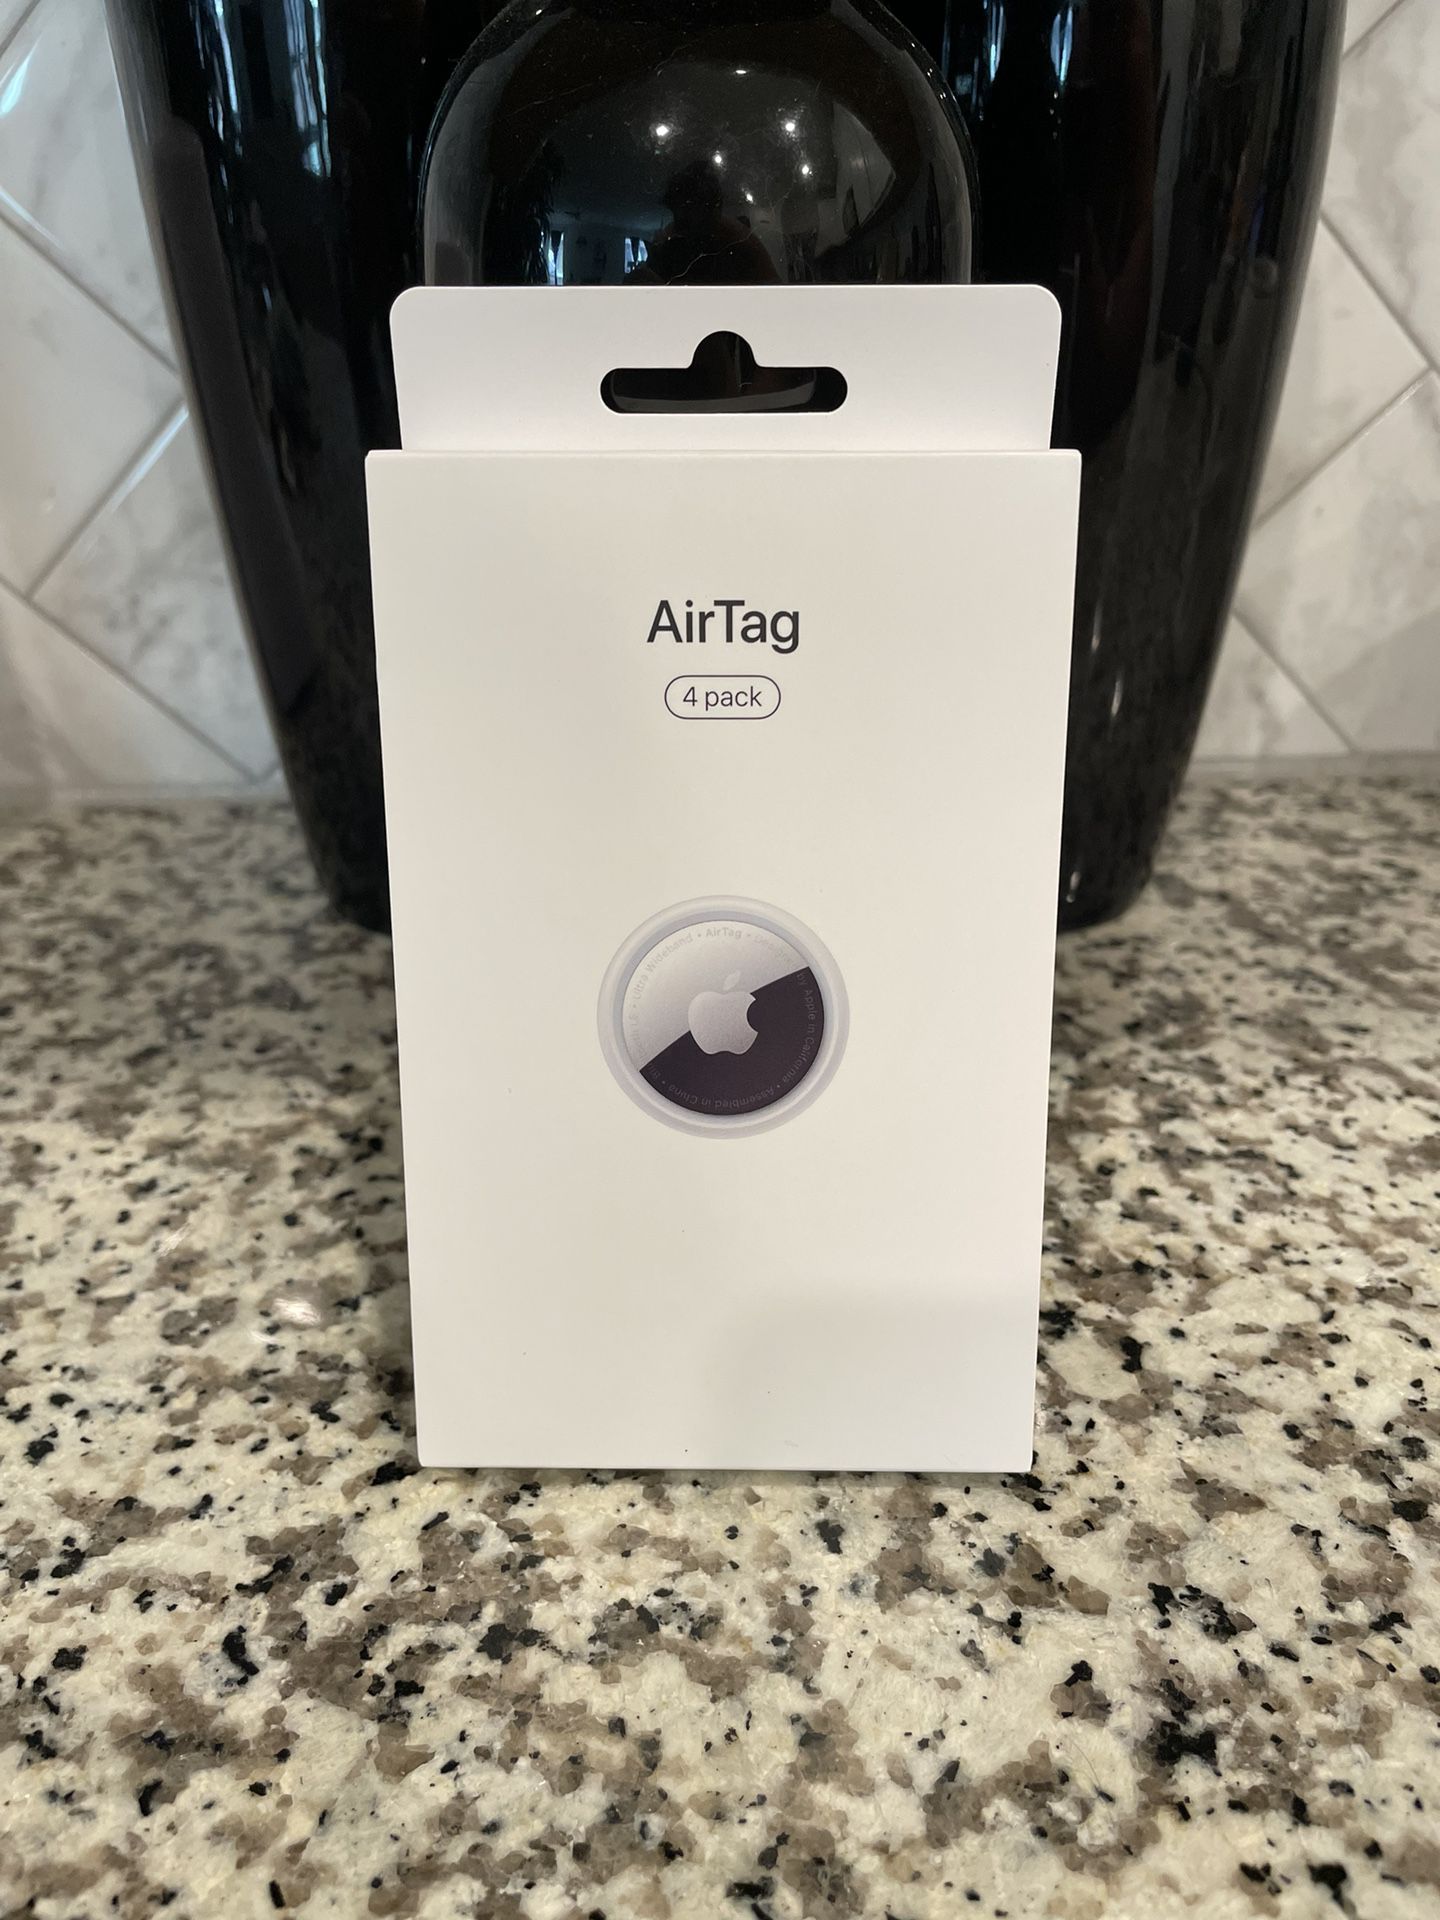 NEW Sealed Apple AirTag 4 Pack Model 2187 MX542AM/A